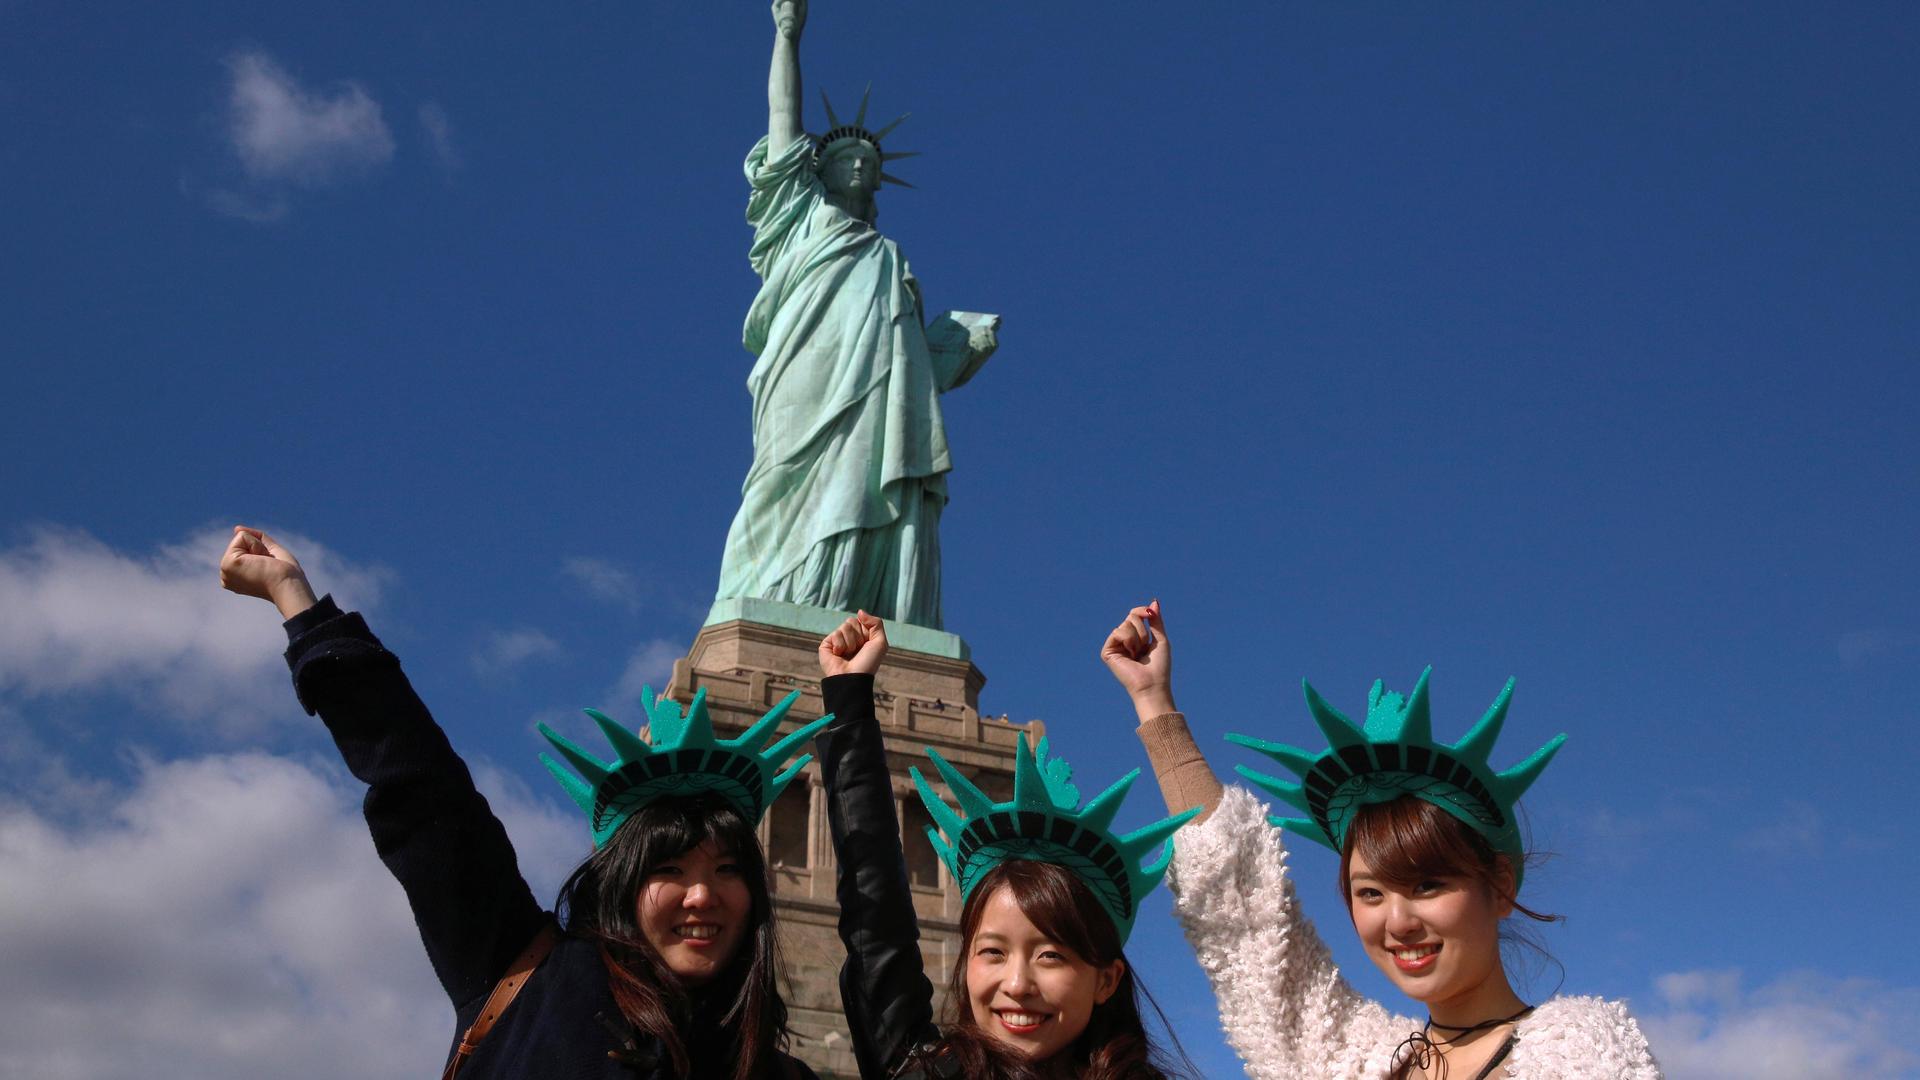 The Statue of Liberty is one of the United States' most-visited tourist attractions.